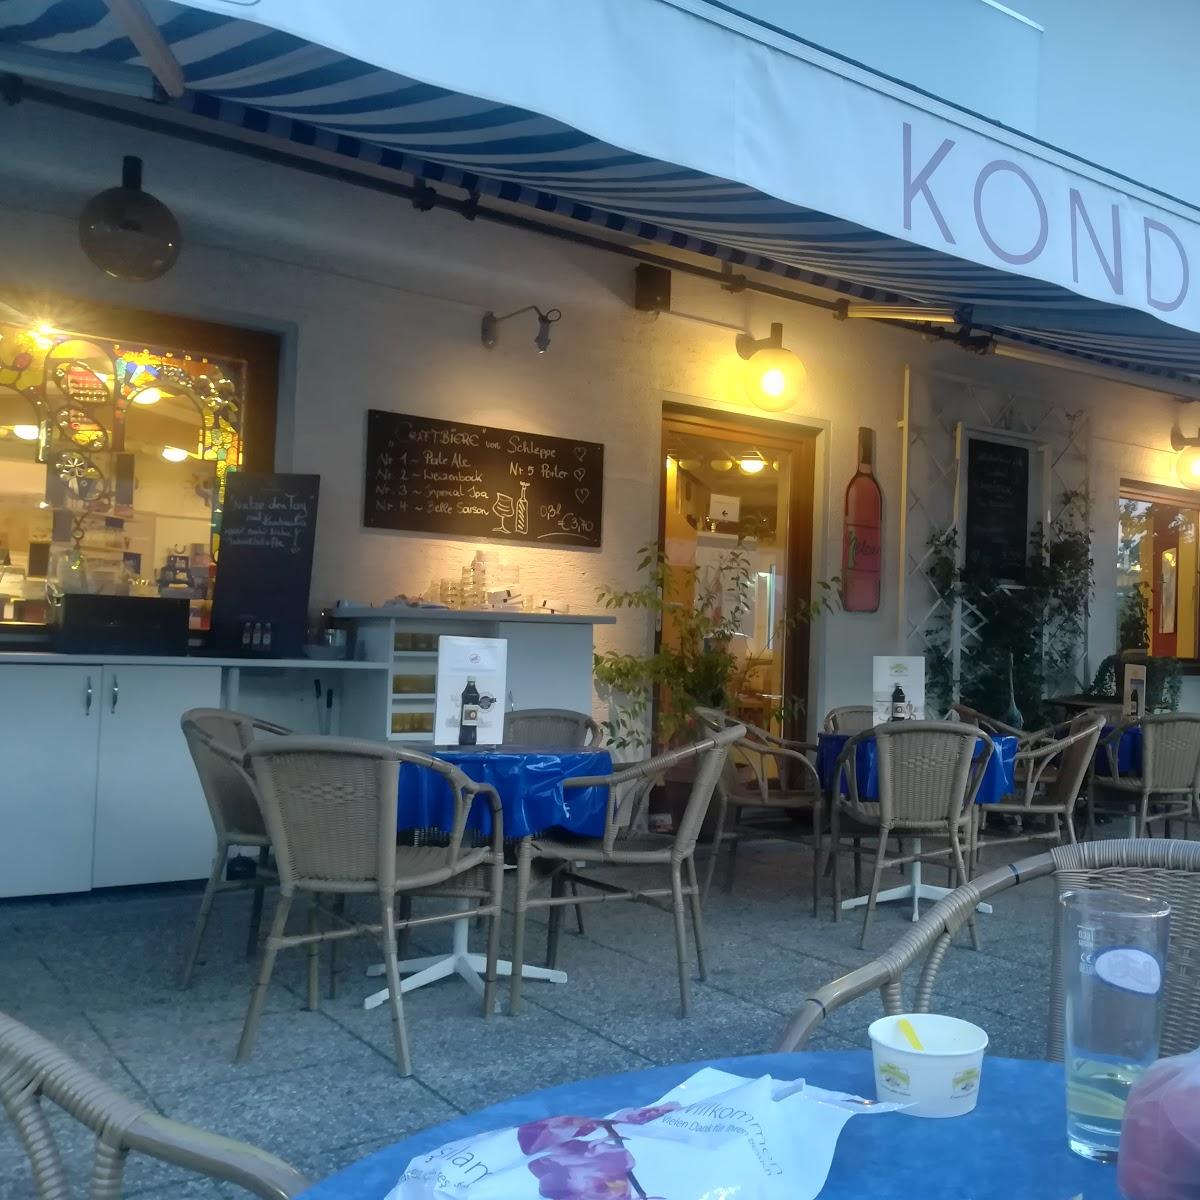 Restaurant "Candis Cafe Konditorei" in Ossiach